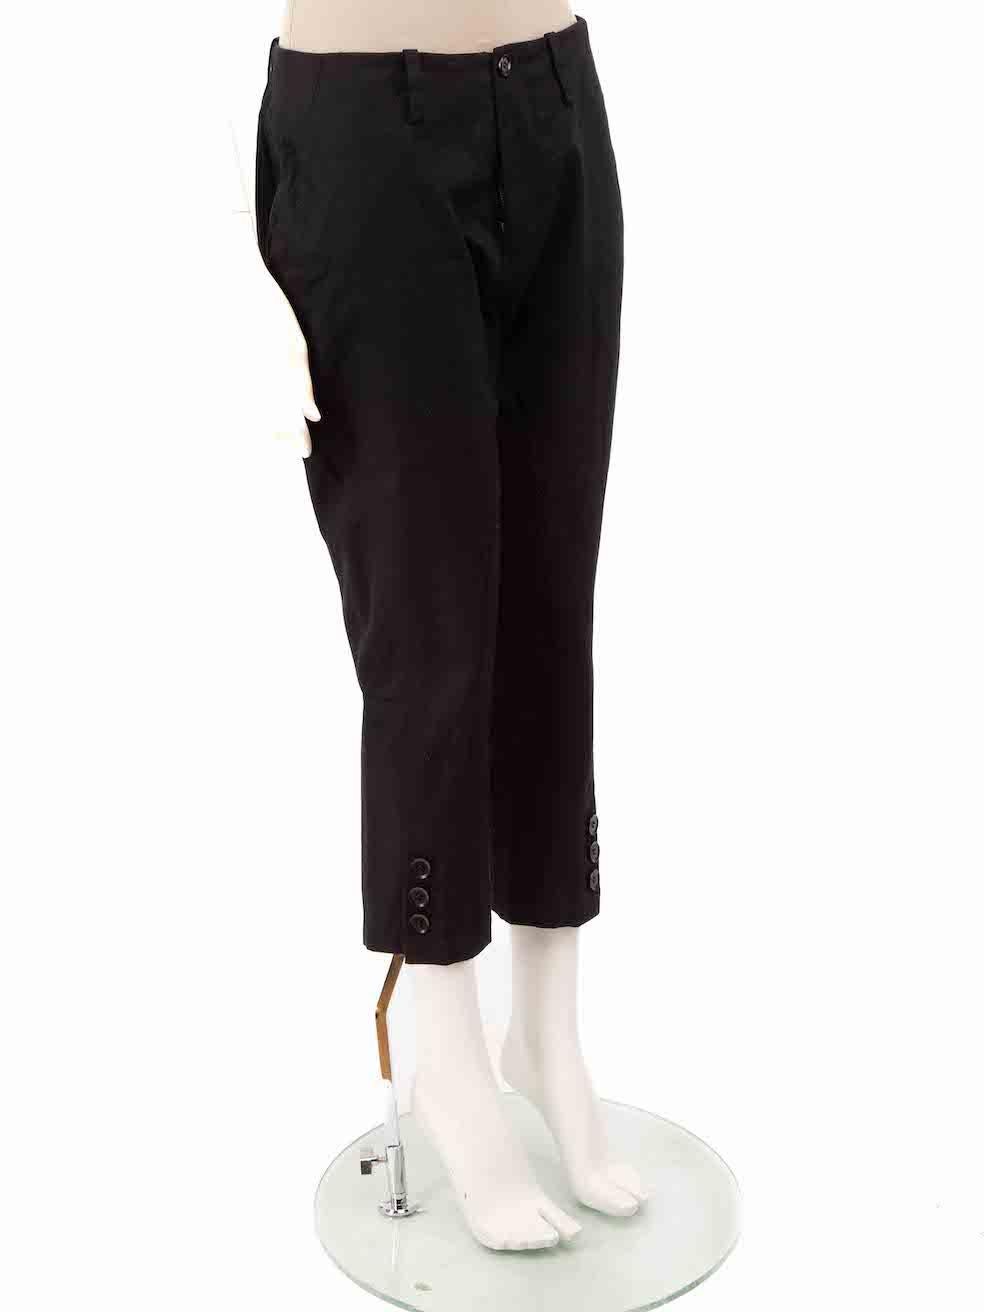 CONDITION is Very good. Hardly any visible wear to trousers is evident on this used Y's Yohji Yamamoto designer resale item.
 
 
 
 Details
 
 
 Black
 
 Cotton
 
 Trousers
 
 Cropped fit
 
 Slim leg
 
 High rise
 
 2x Side pockets
 
 Fly zip and